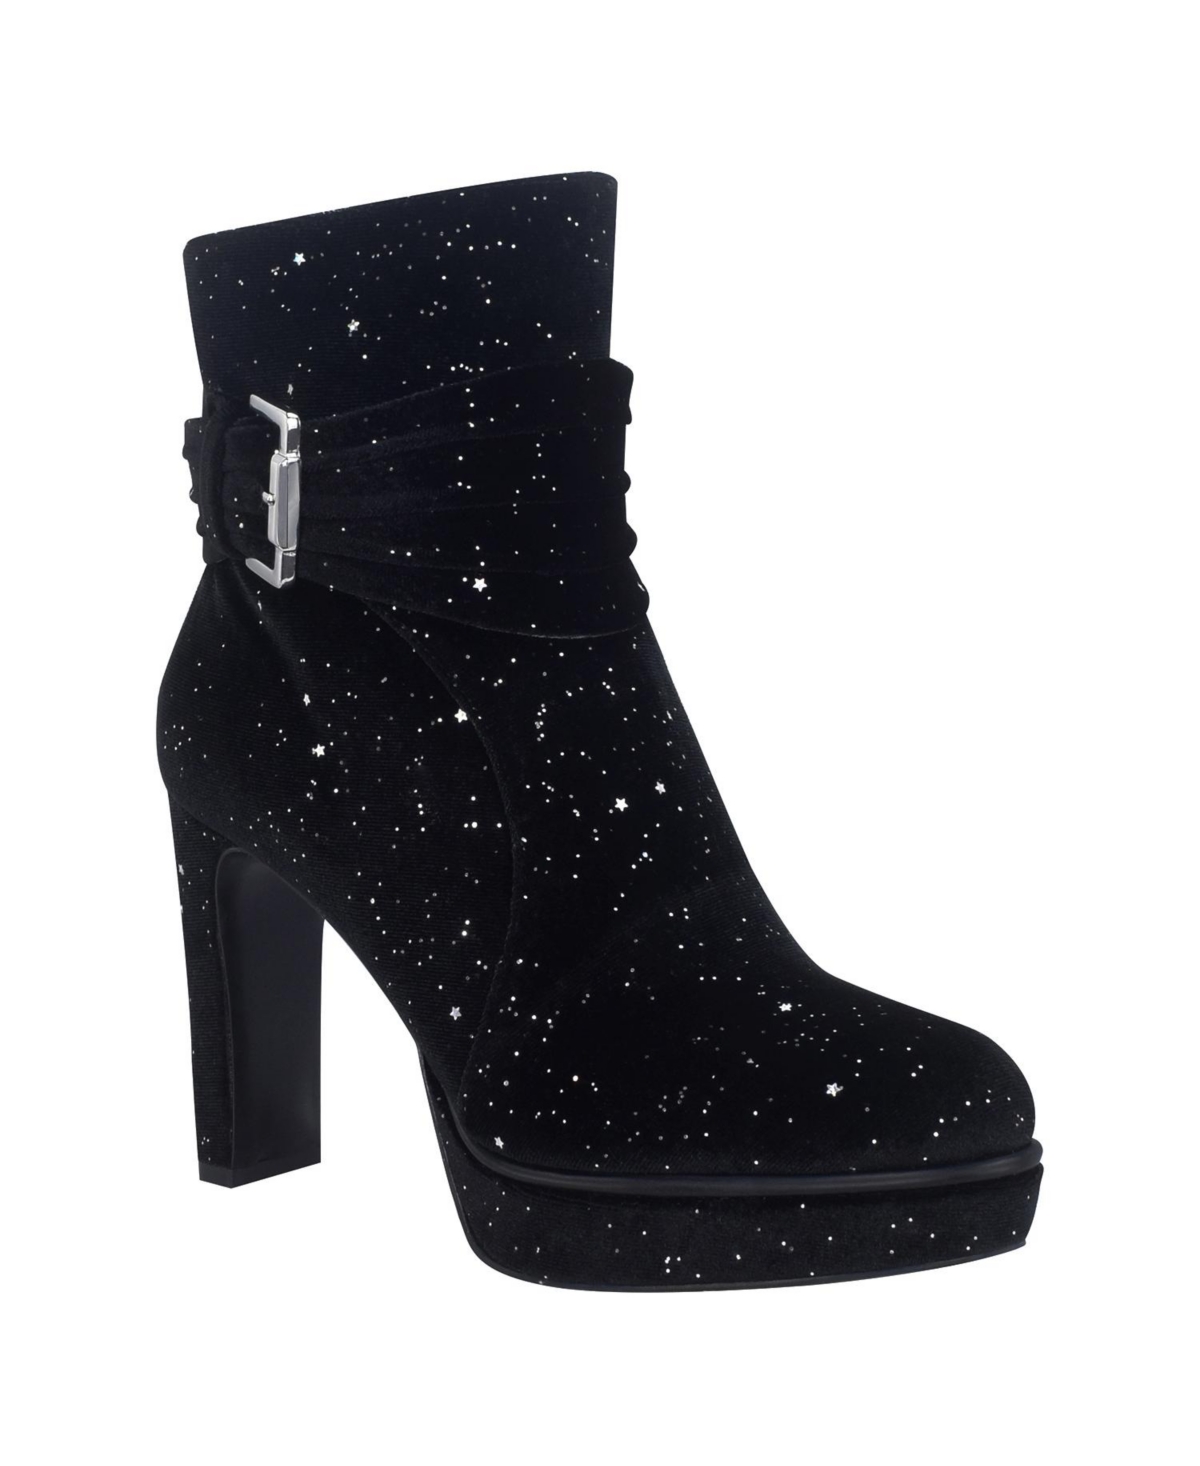 Impo Women's Omira Bling Platform Ankle Boots With Memory Foam In Black Bling